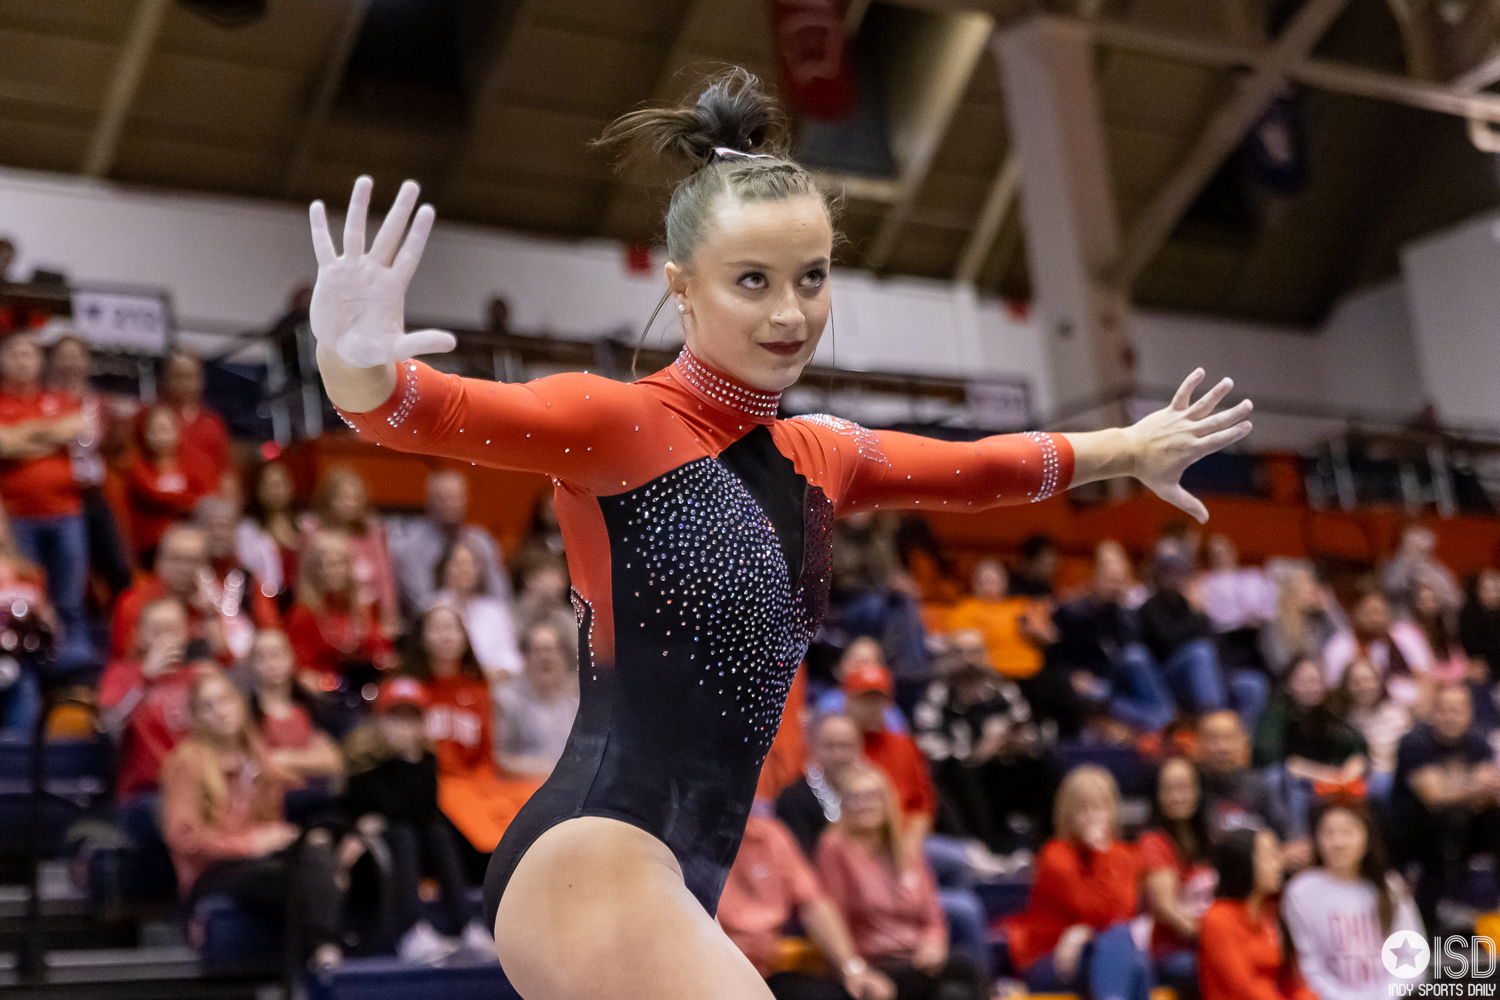 Ohio State women's gymnastics improves to 9 1 with a victory over